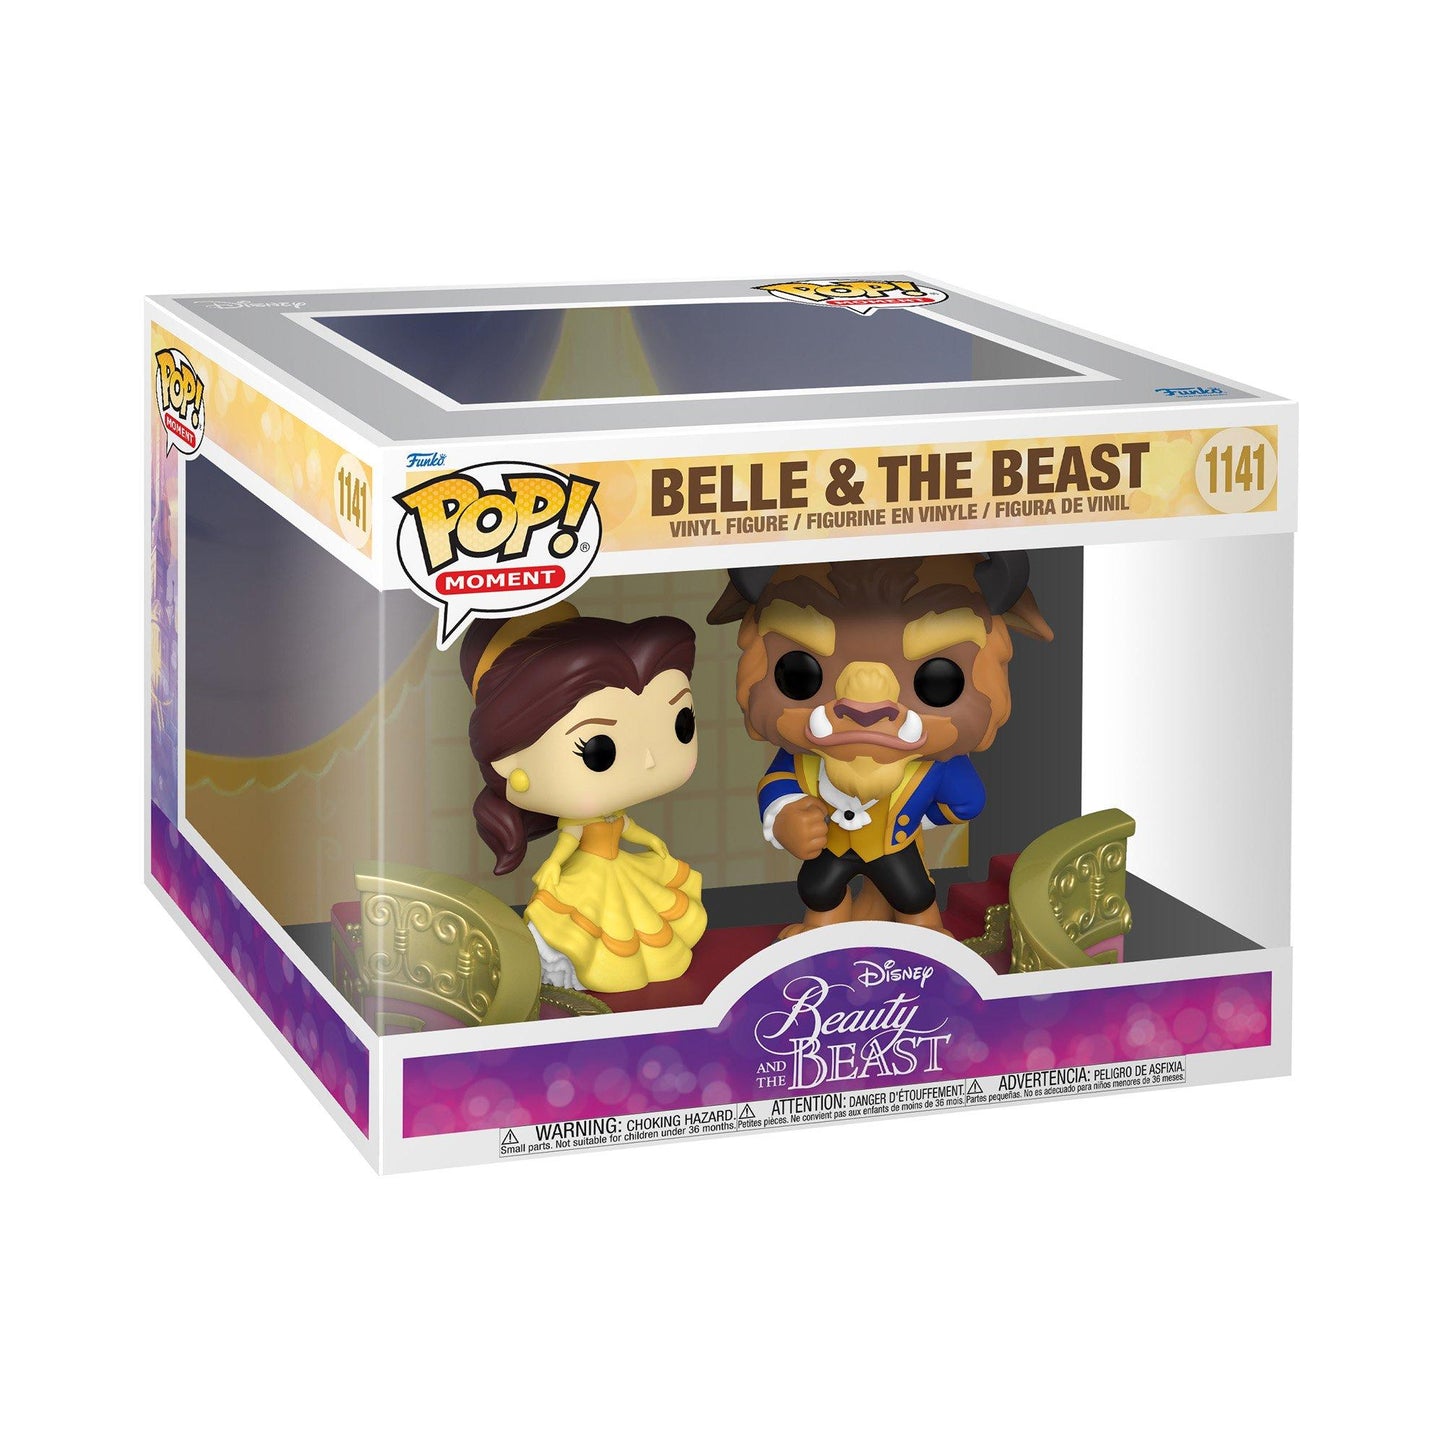 Loungefly Releases New Beauty and the Beast 30th Anniversary Collection